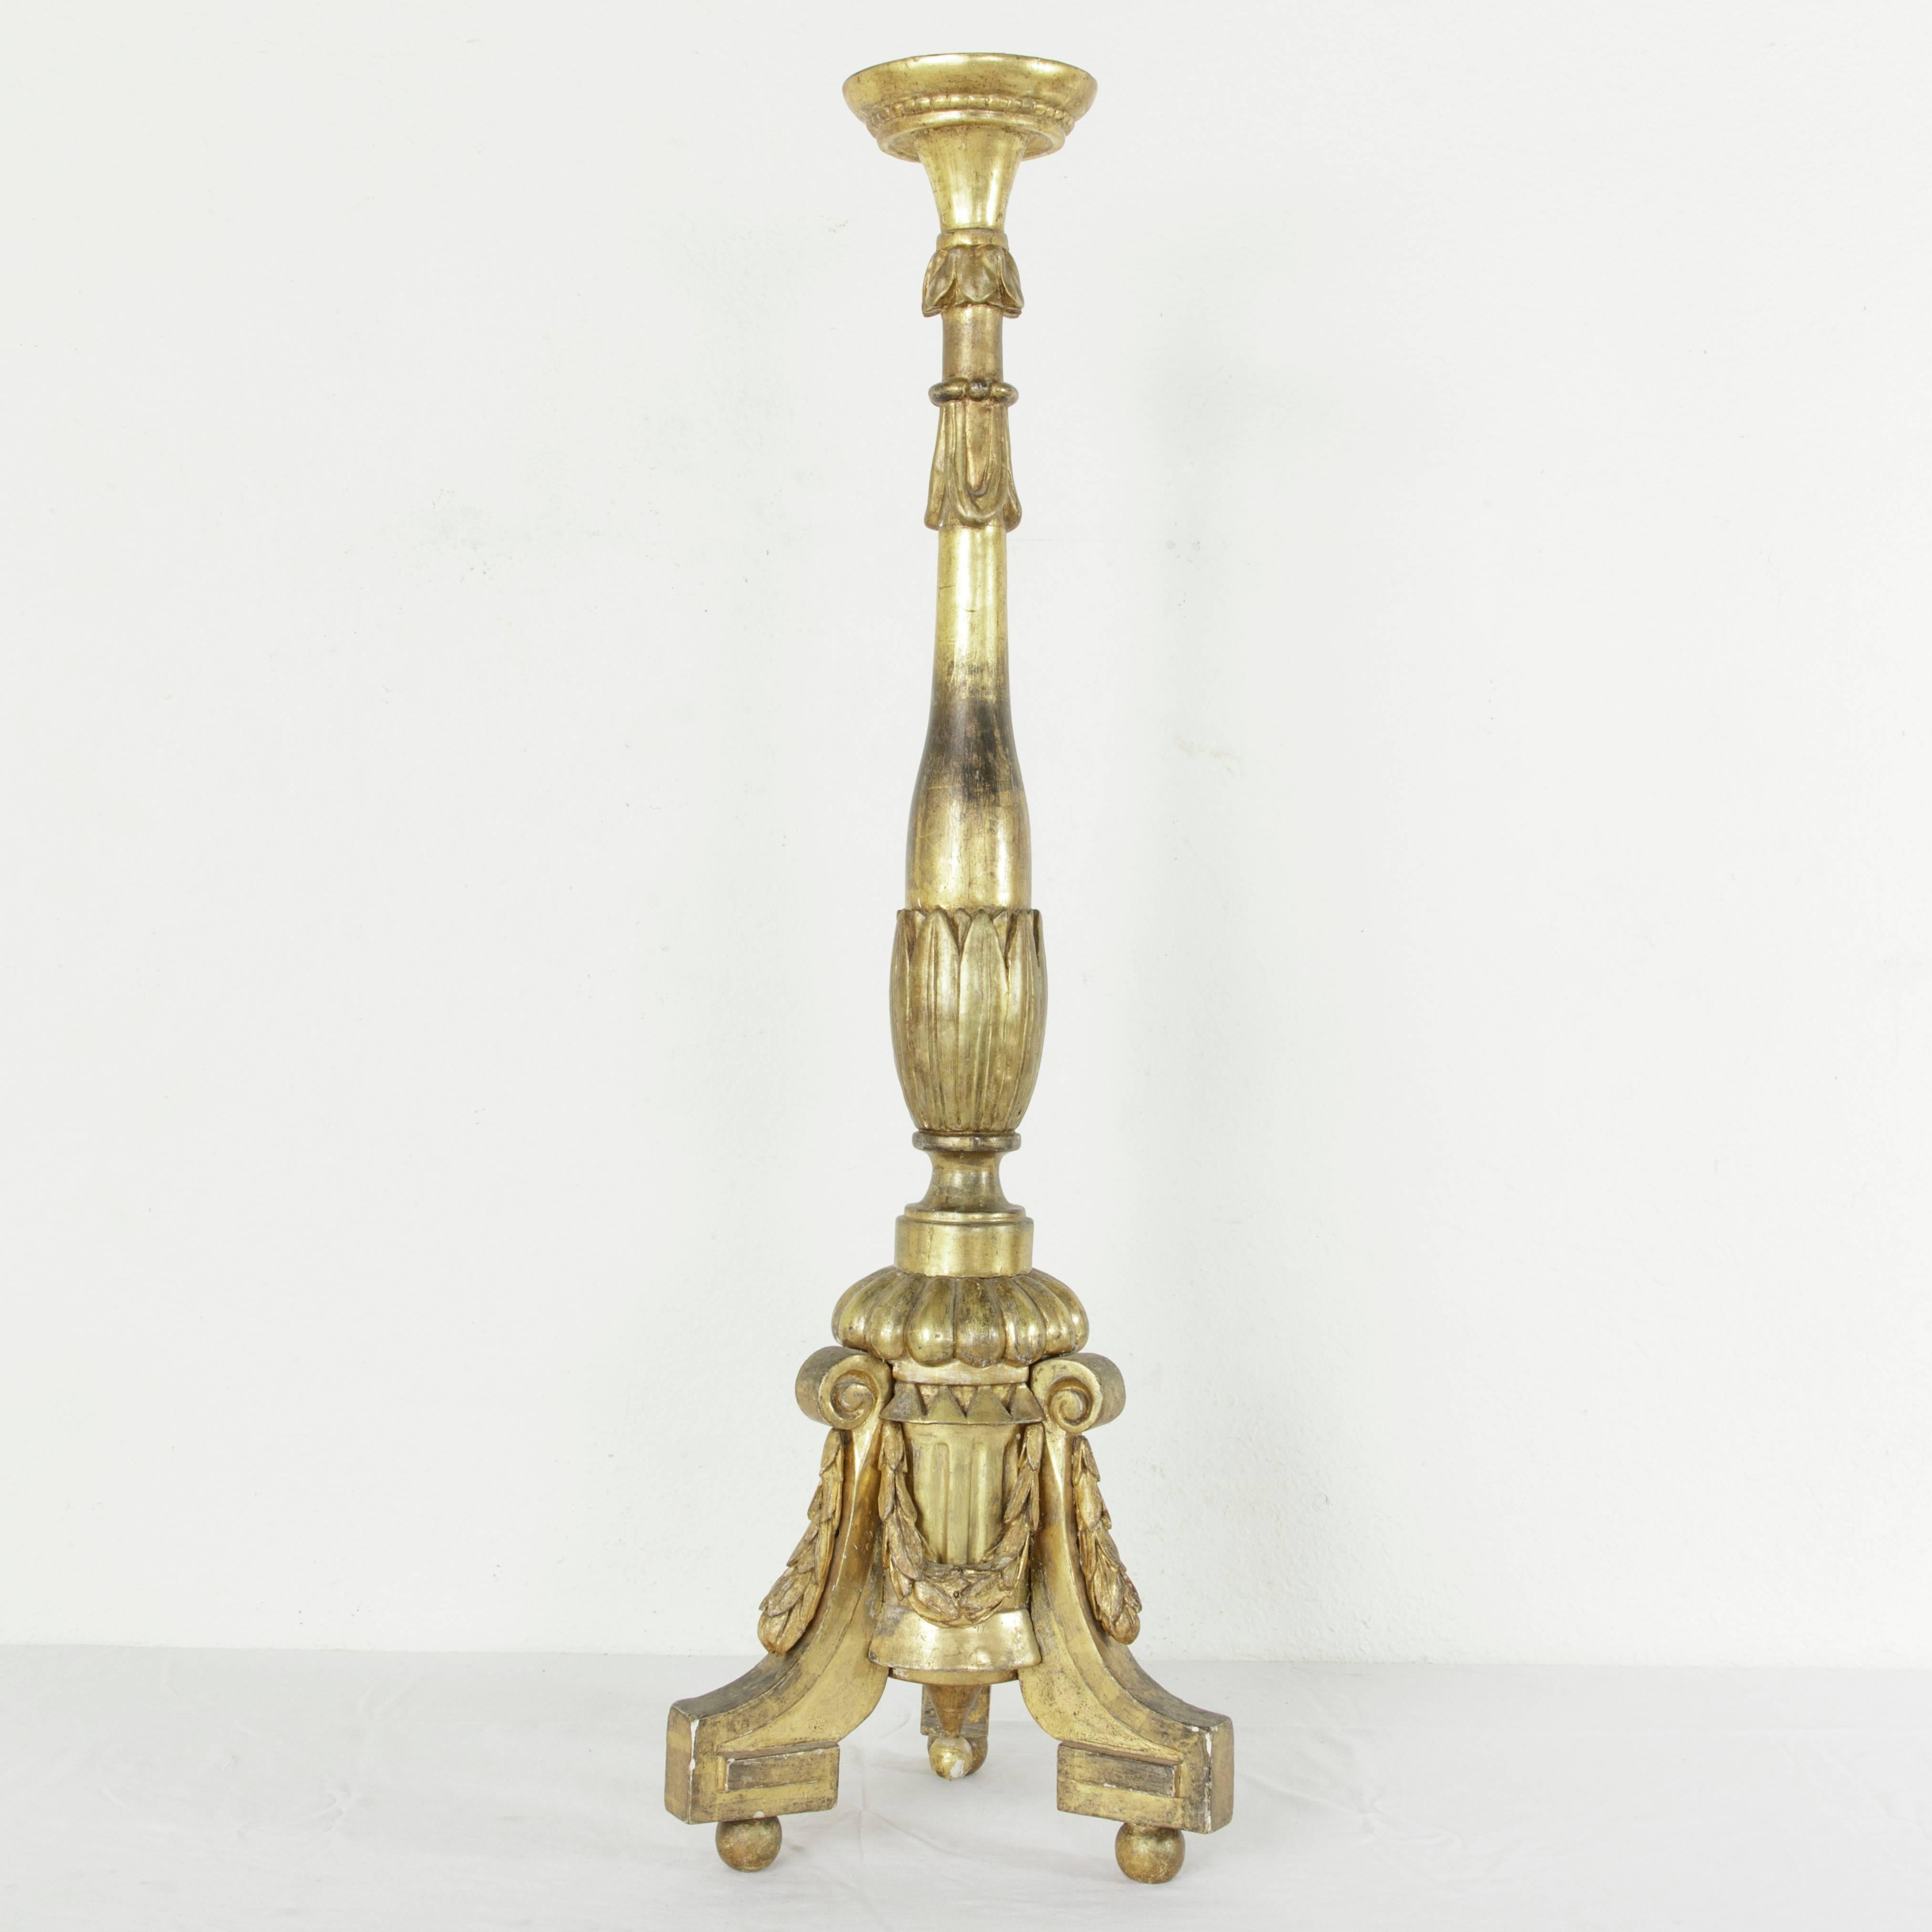 Very Tall 19th Century French Louis XVI Style Giltwood Pricket Candlestick 2